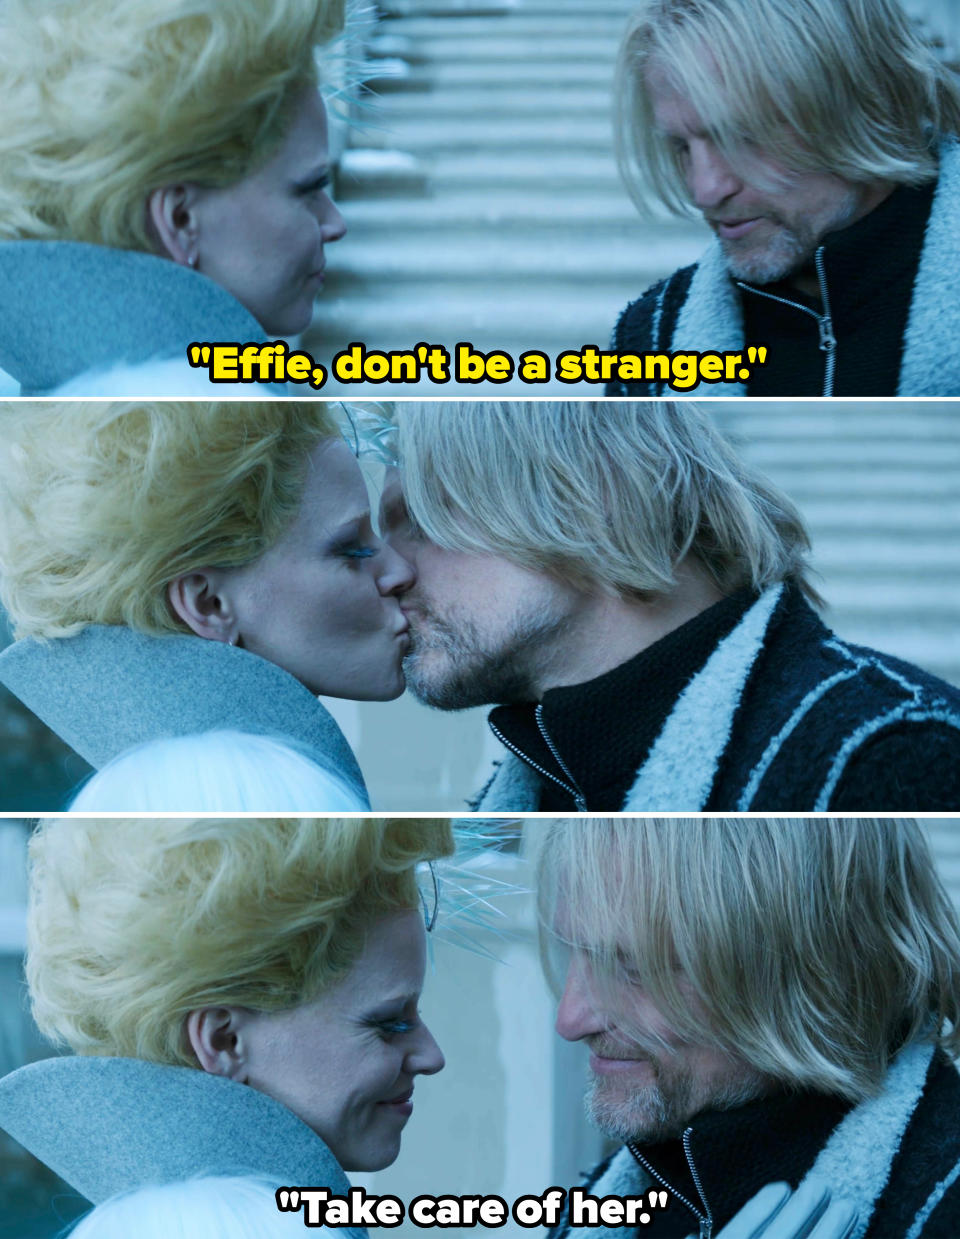 Haymitch telling Effie not to be a stranger, then kissing her, with Effie following up the kiss with, "Take care of her"